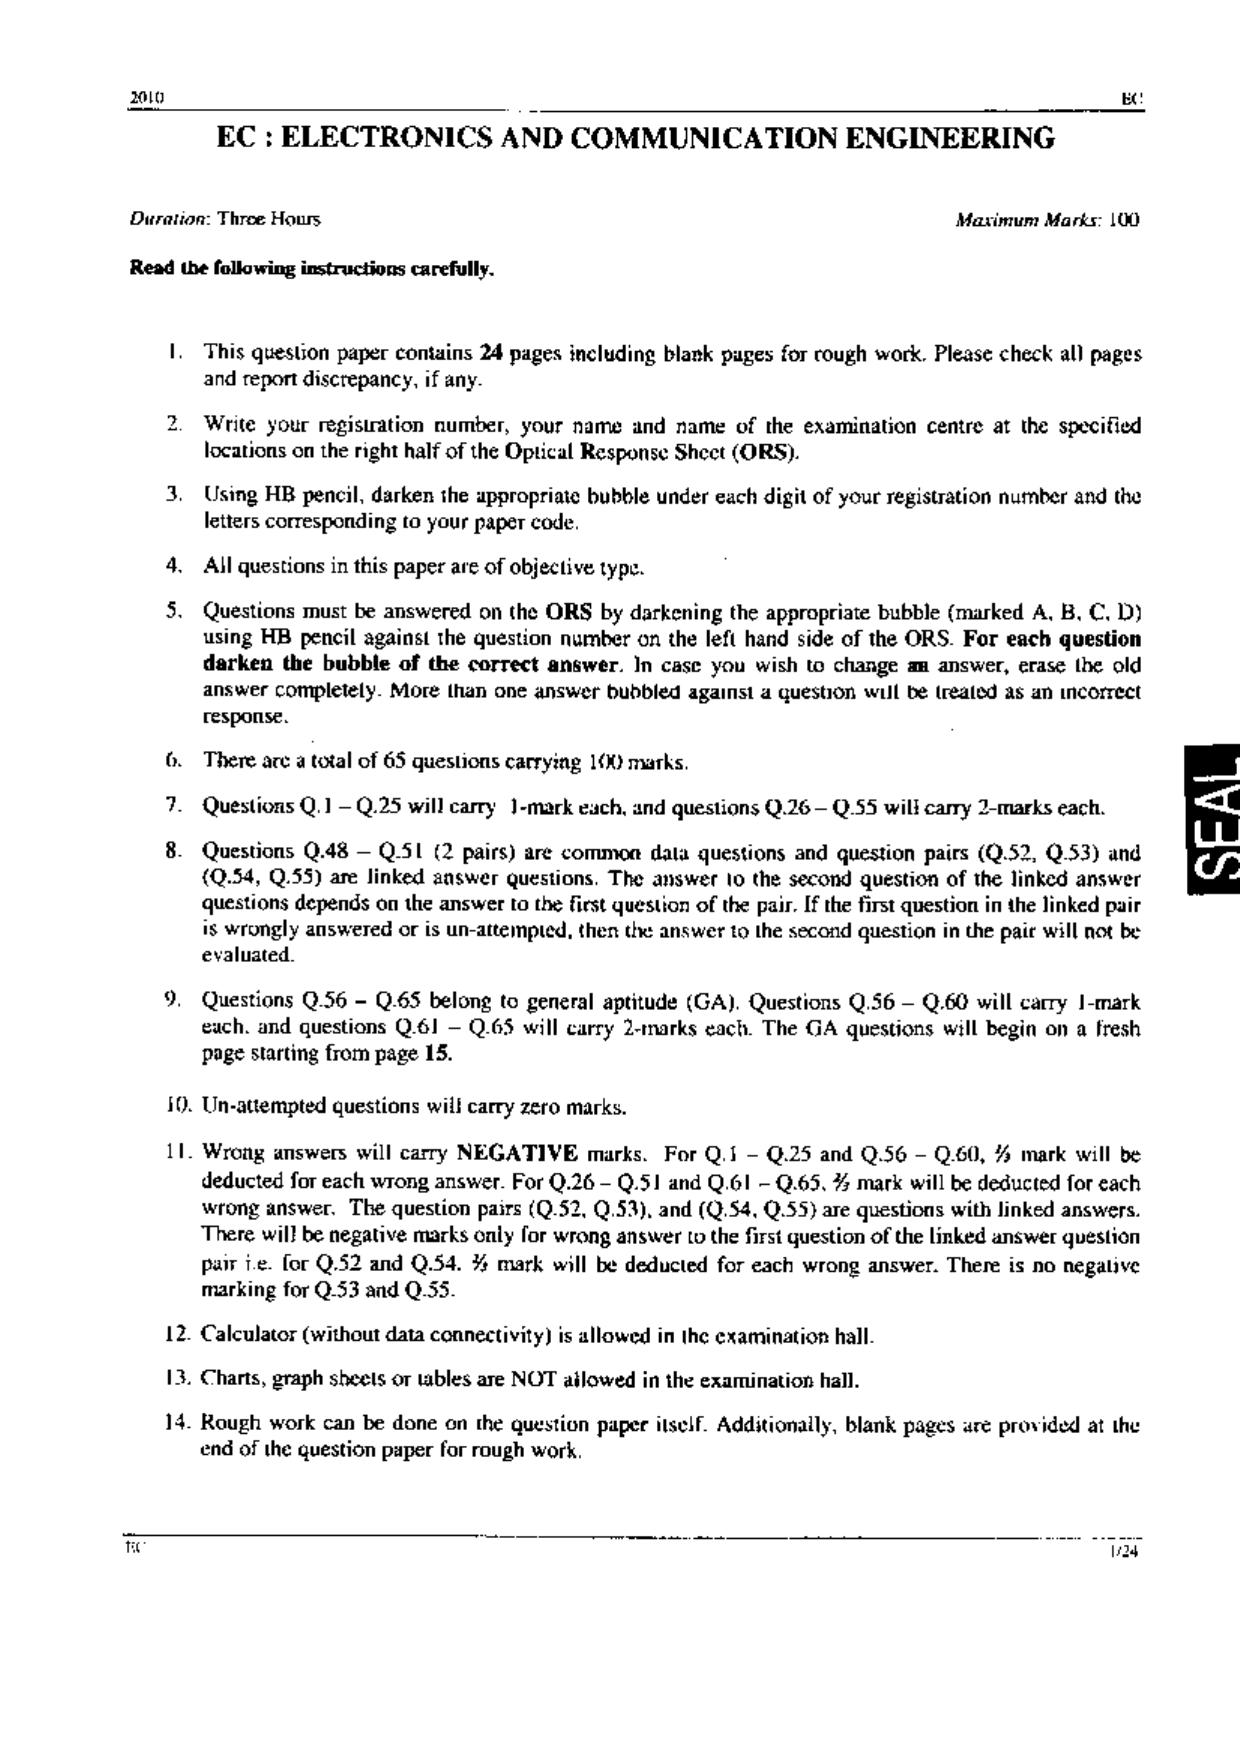 GATE 2010 Electronics and Communication Engineering (EC) Question Paper with Answer Key - Page 1